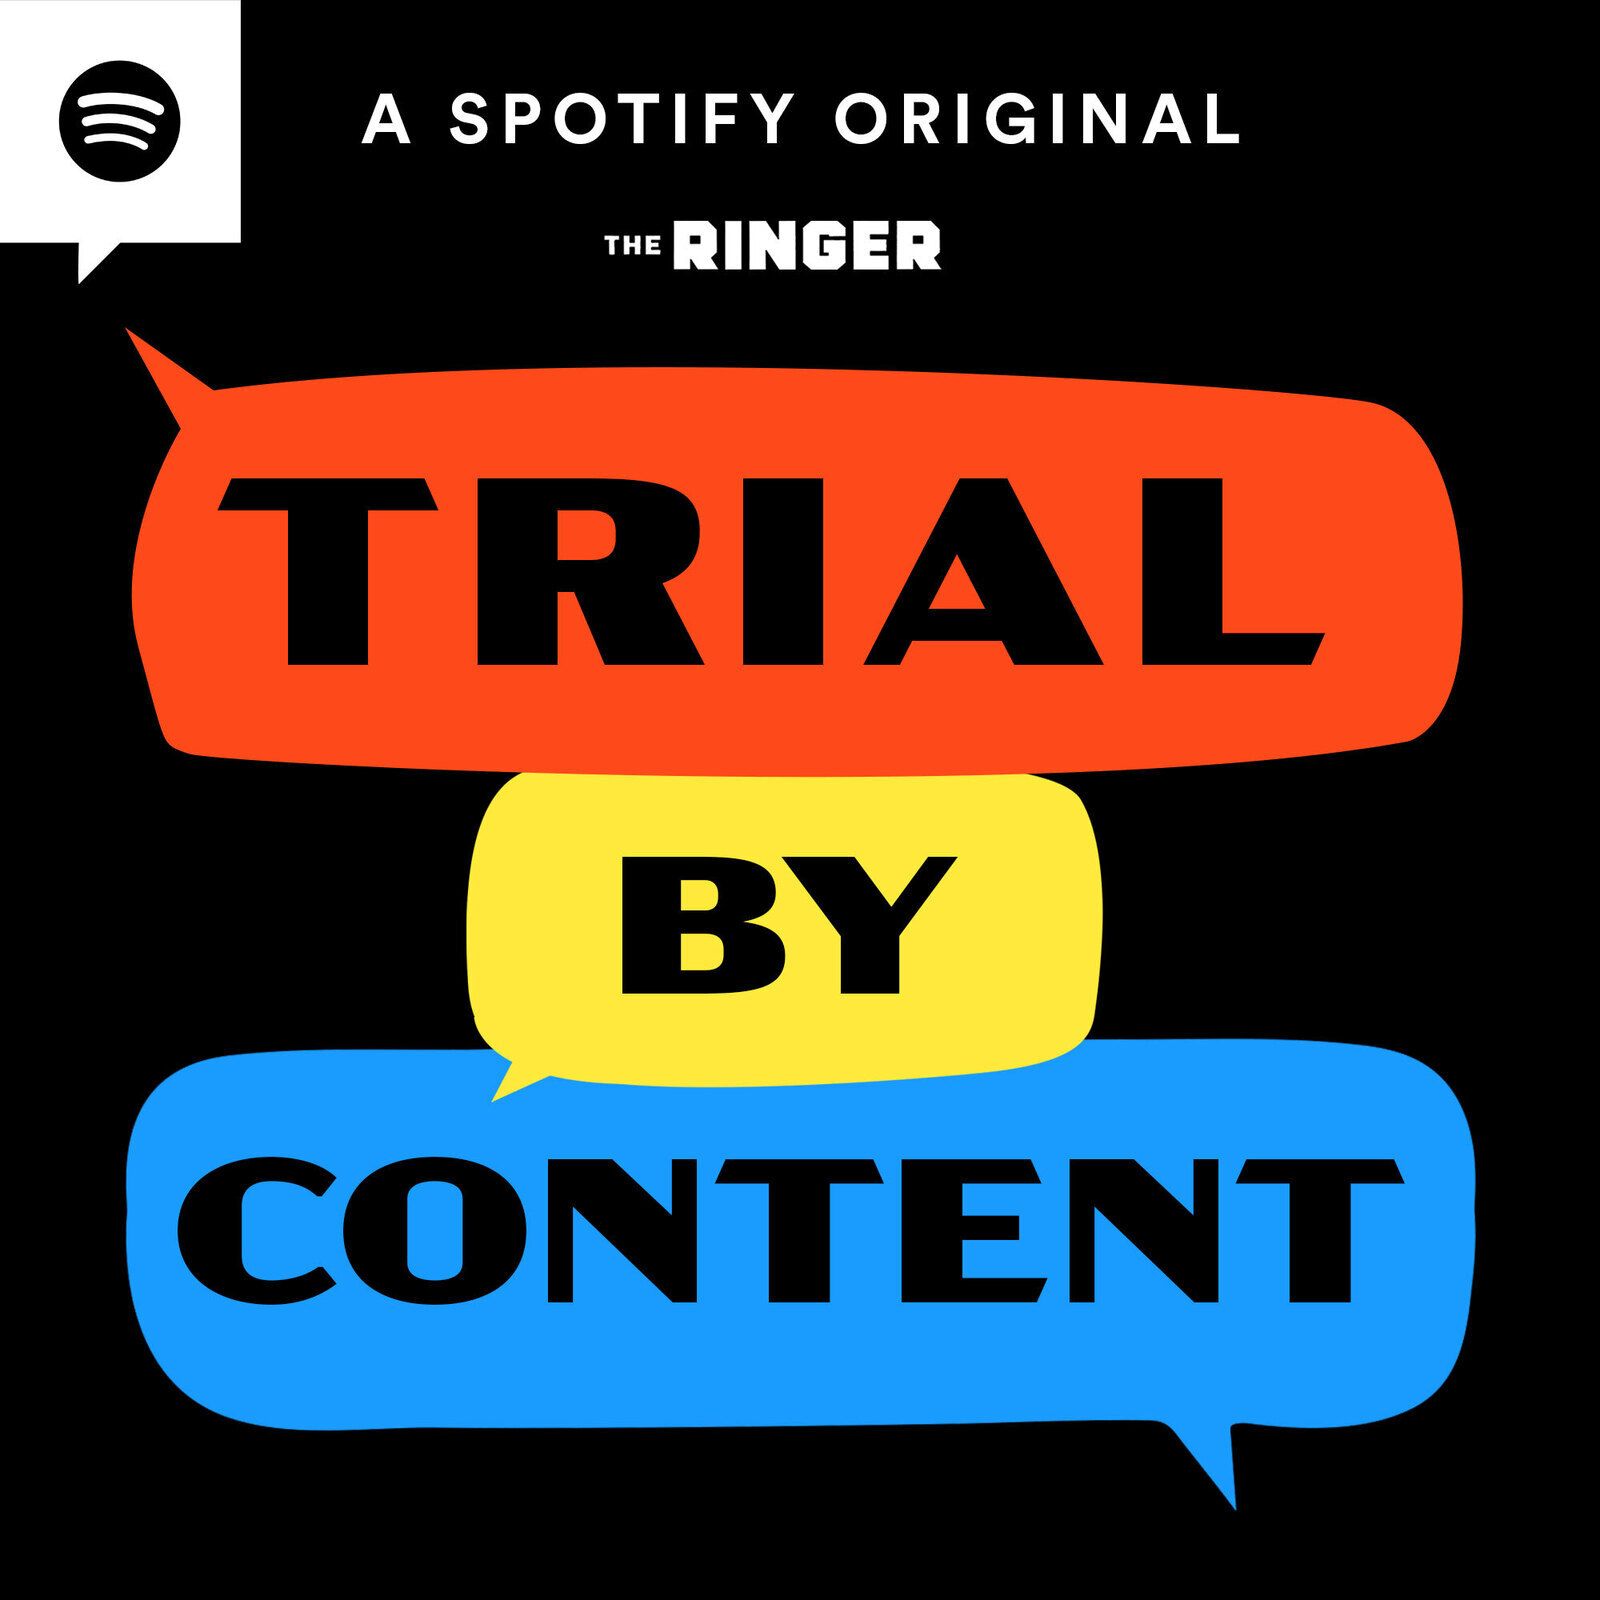 Introducing TRIAL BY CONTENT